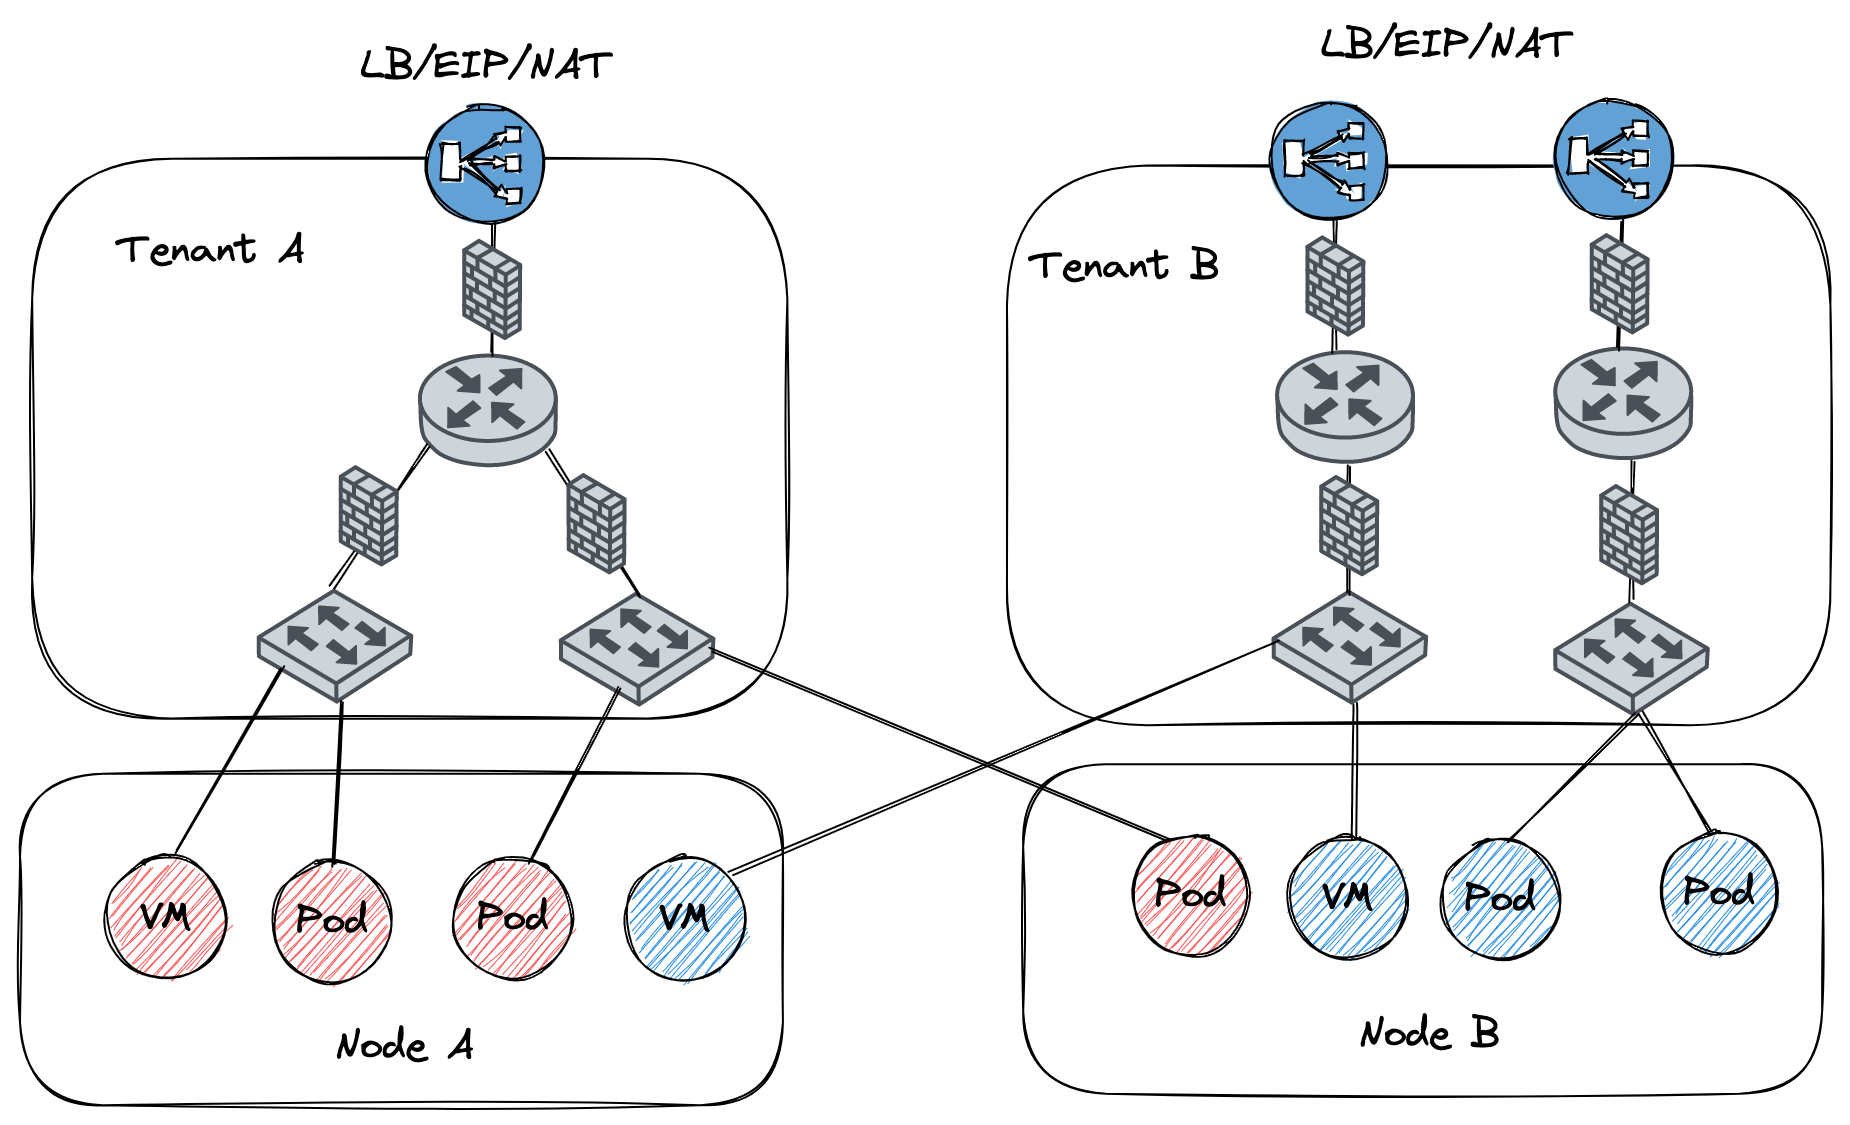 ovn-network-topology.png